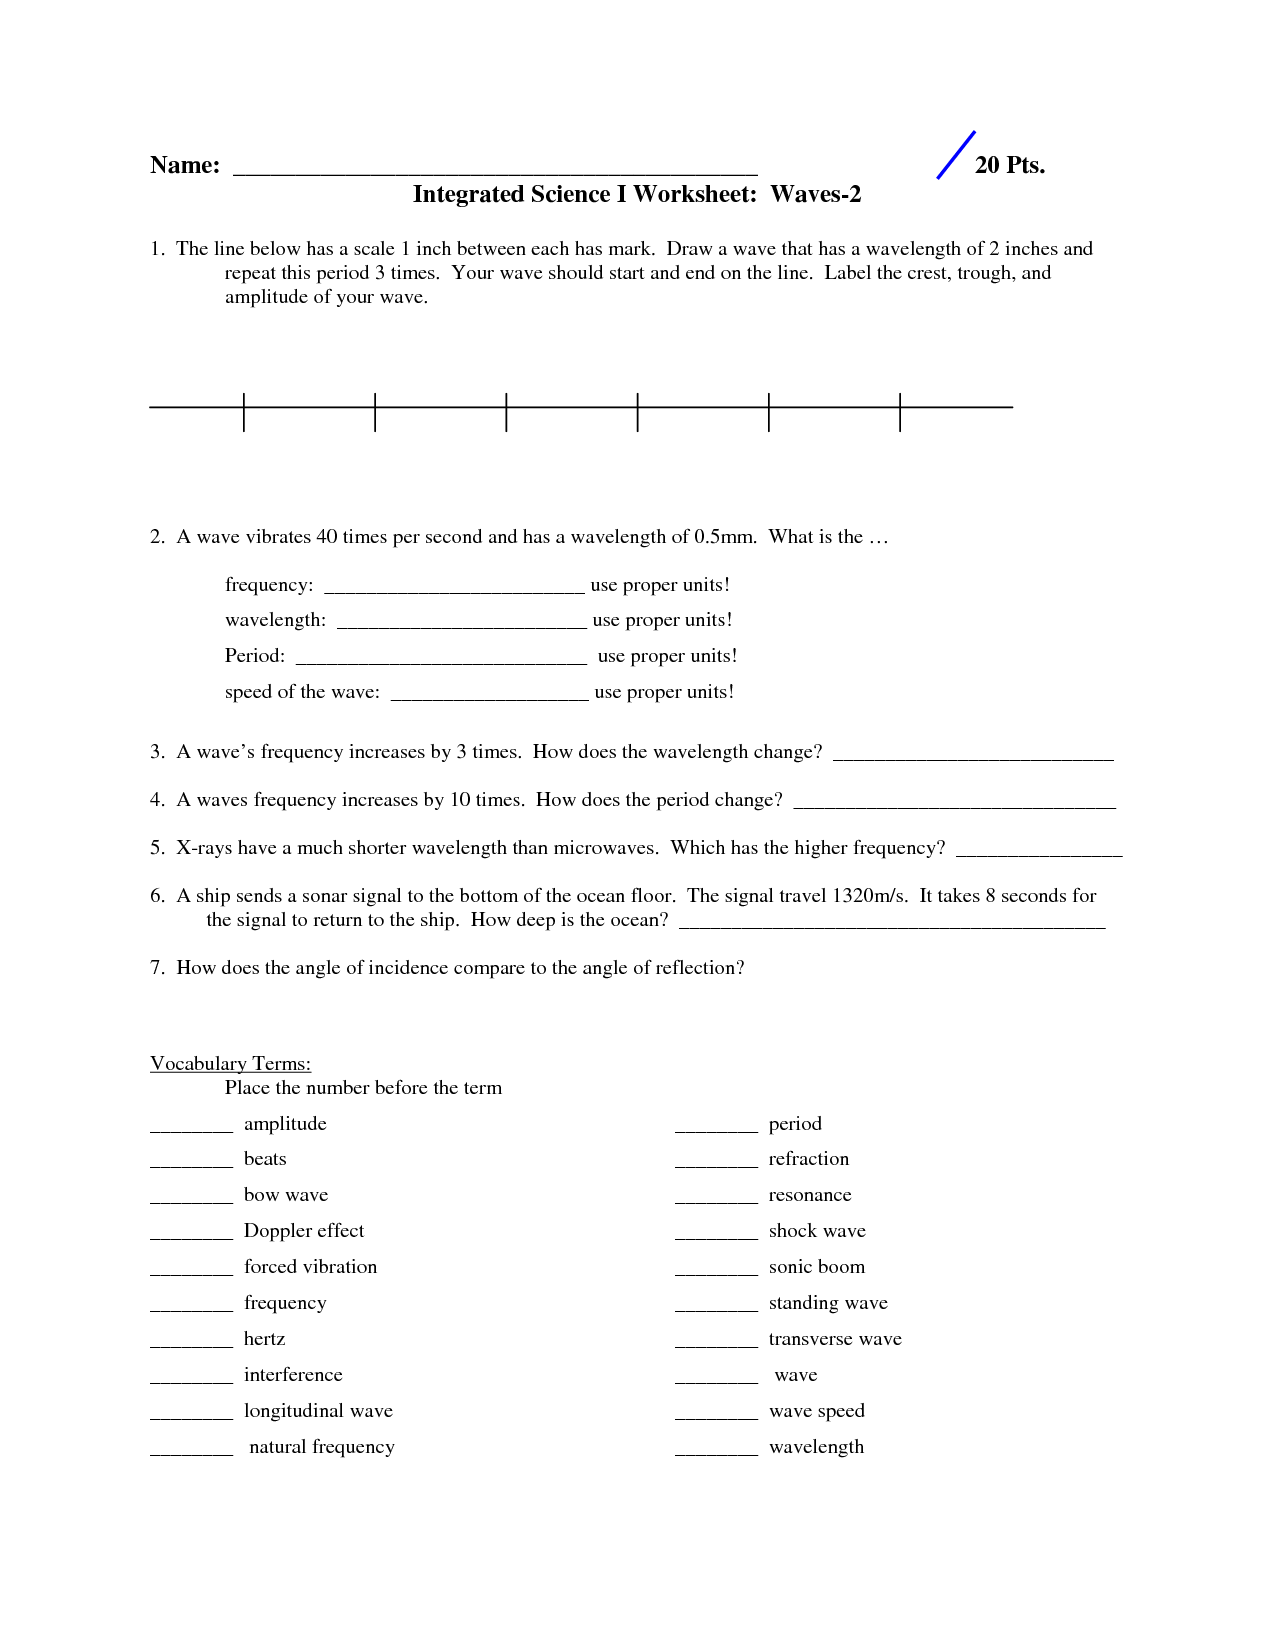 Light and Waves Worksheet Answers Image